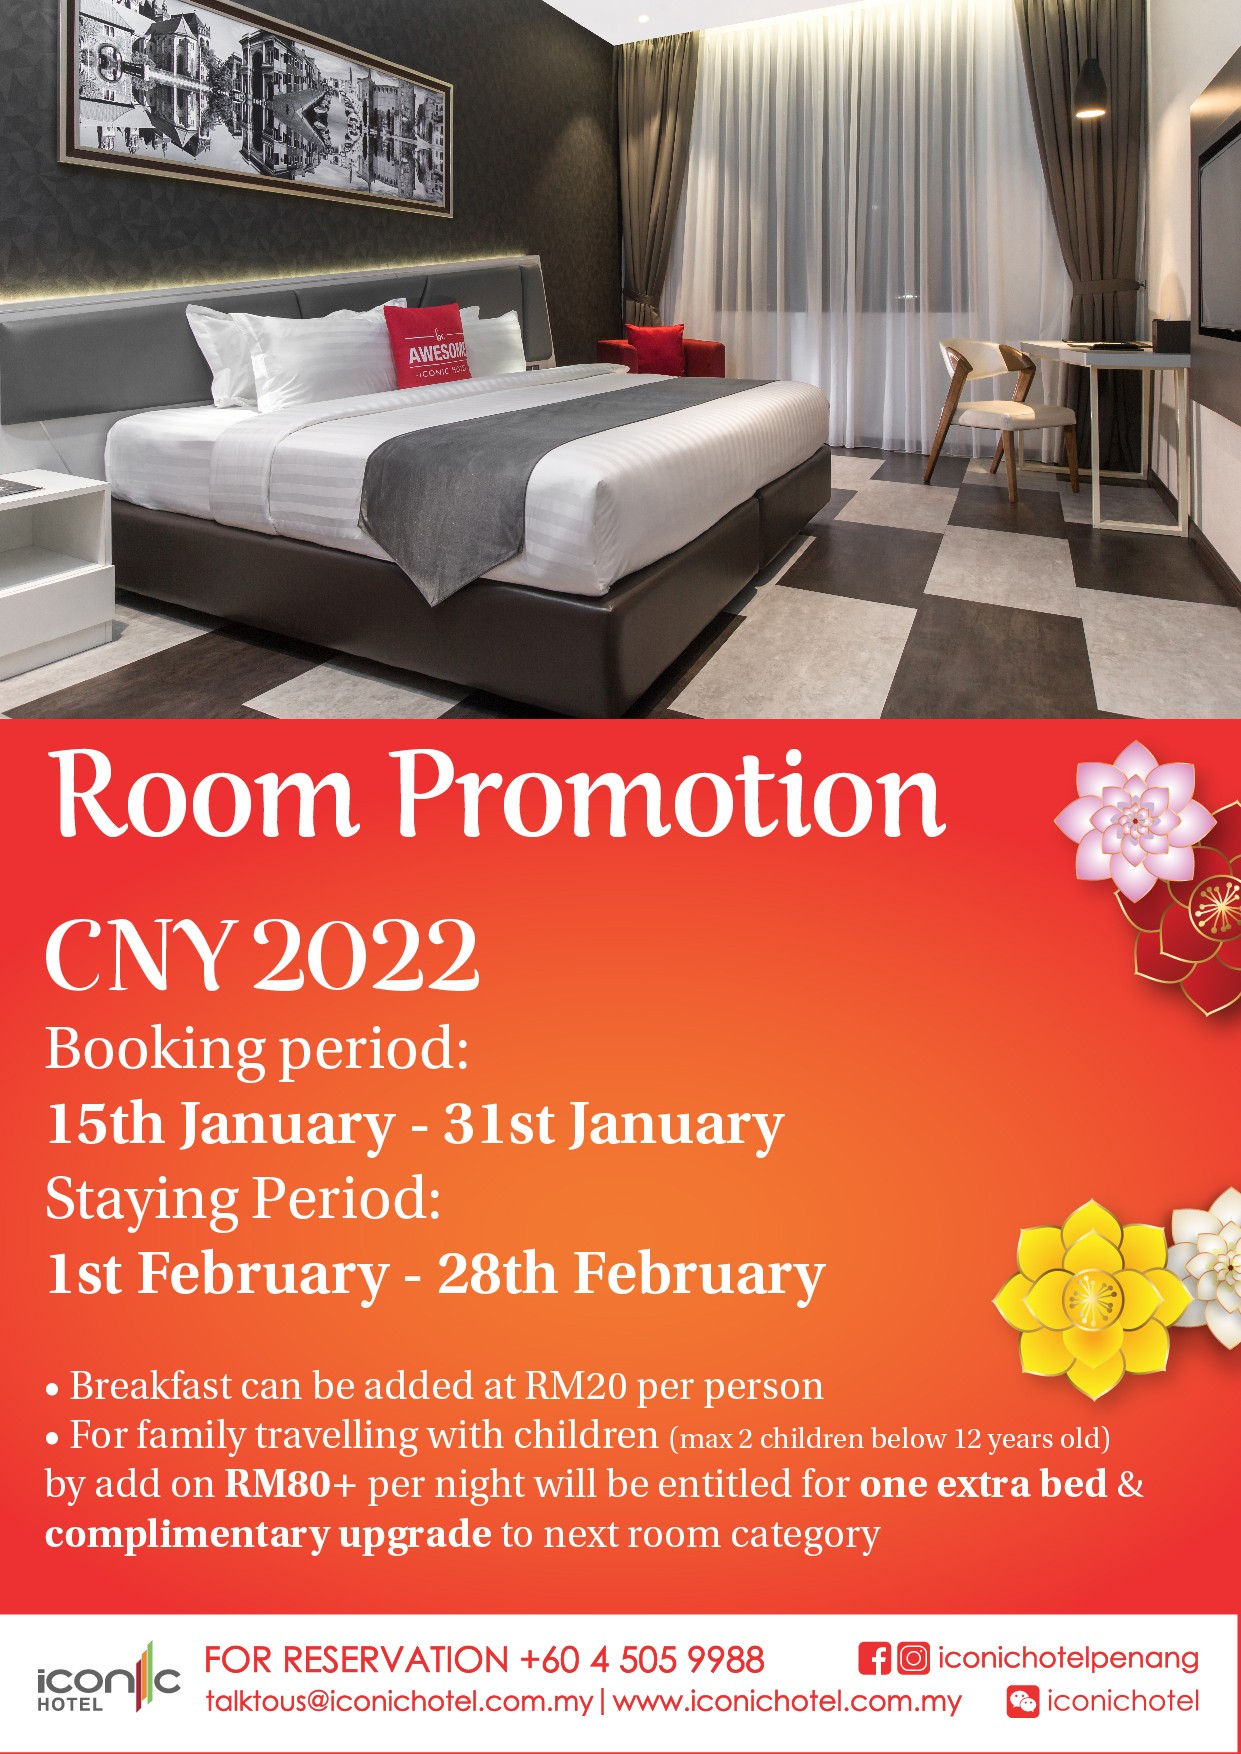 Room promotion by Iconic Hotel